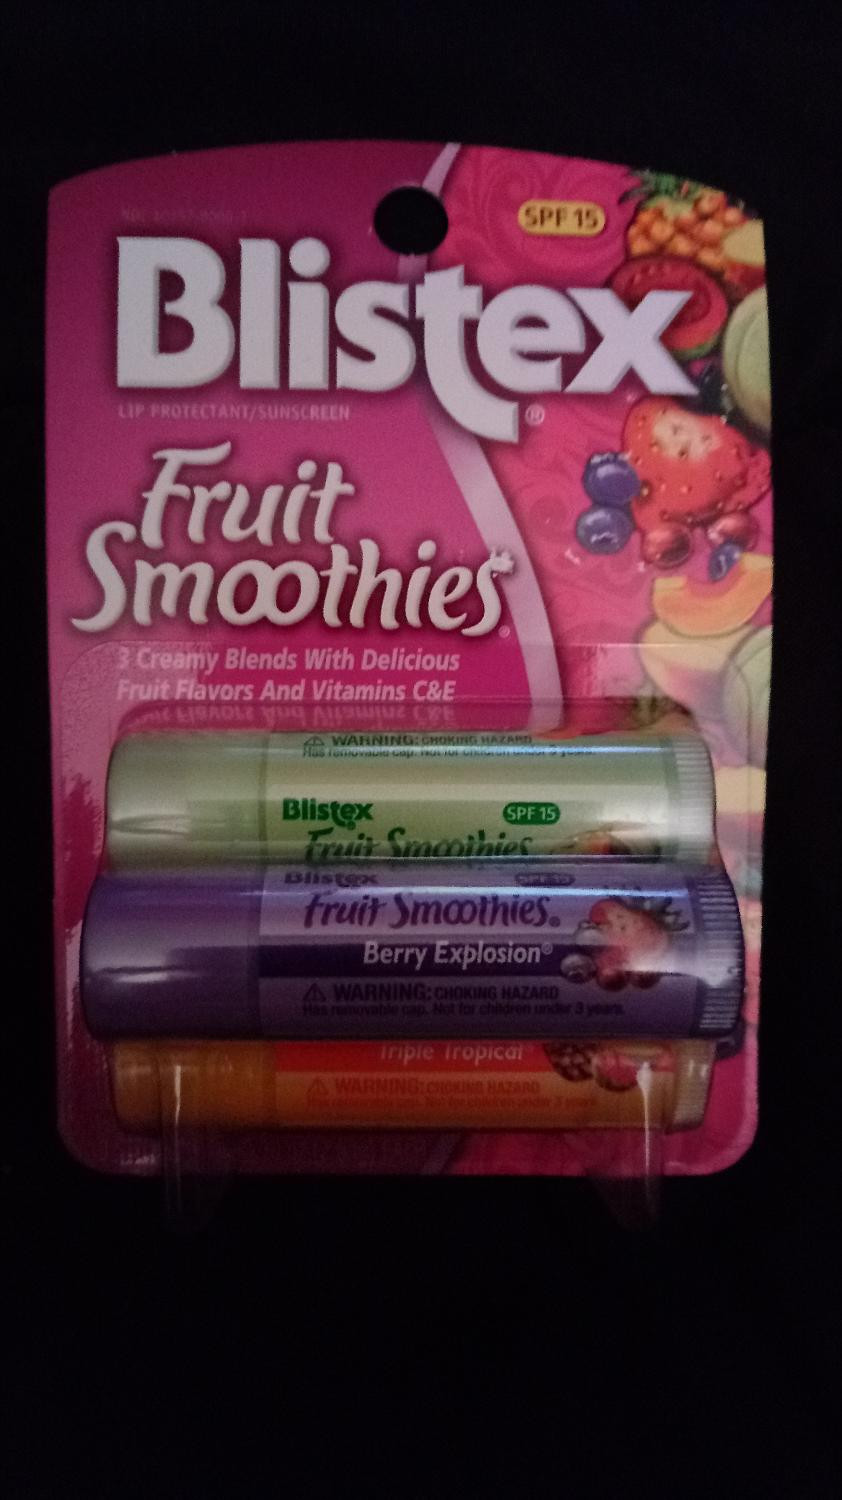 Blistex Fruit Smoothies
 Find more Blistex Fruit Smoothies 3 Pack for sale at up to